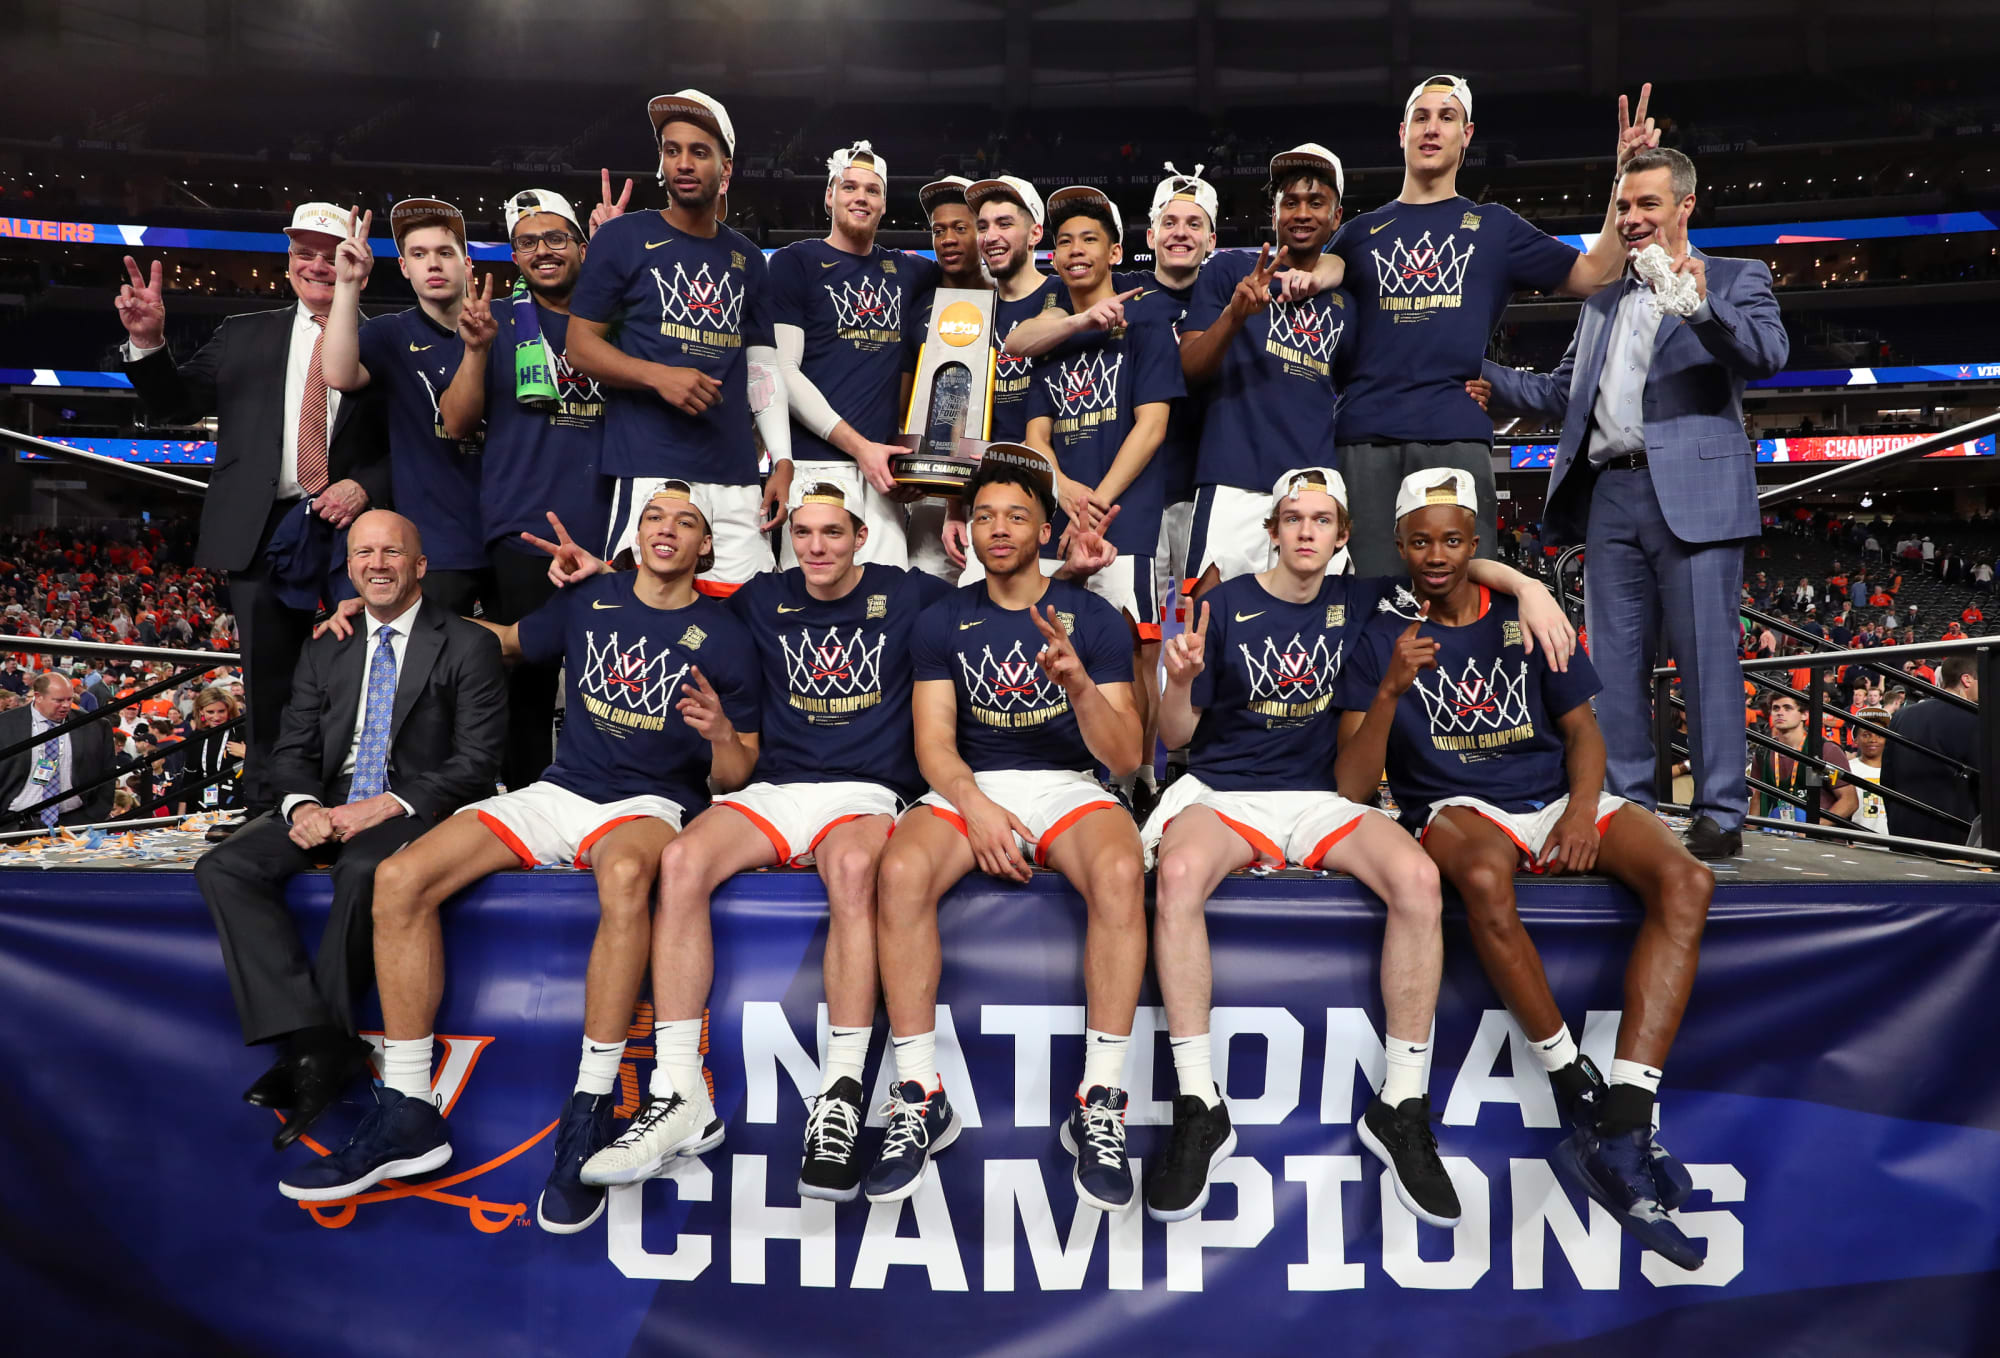 Indiana Basketball: Hoosiers have 13th best 2020 National Championship odds